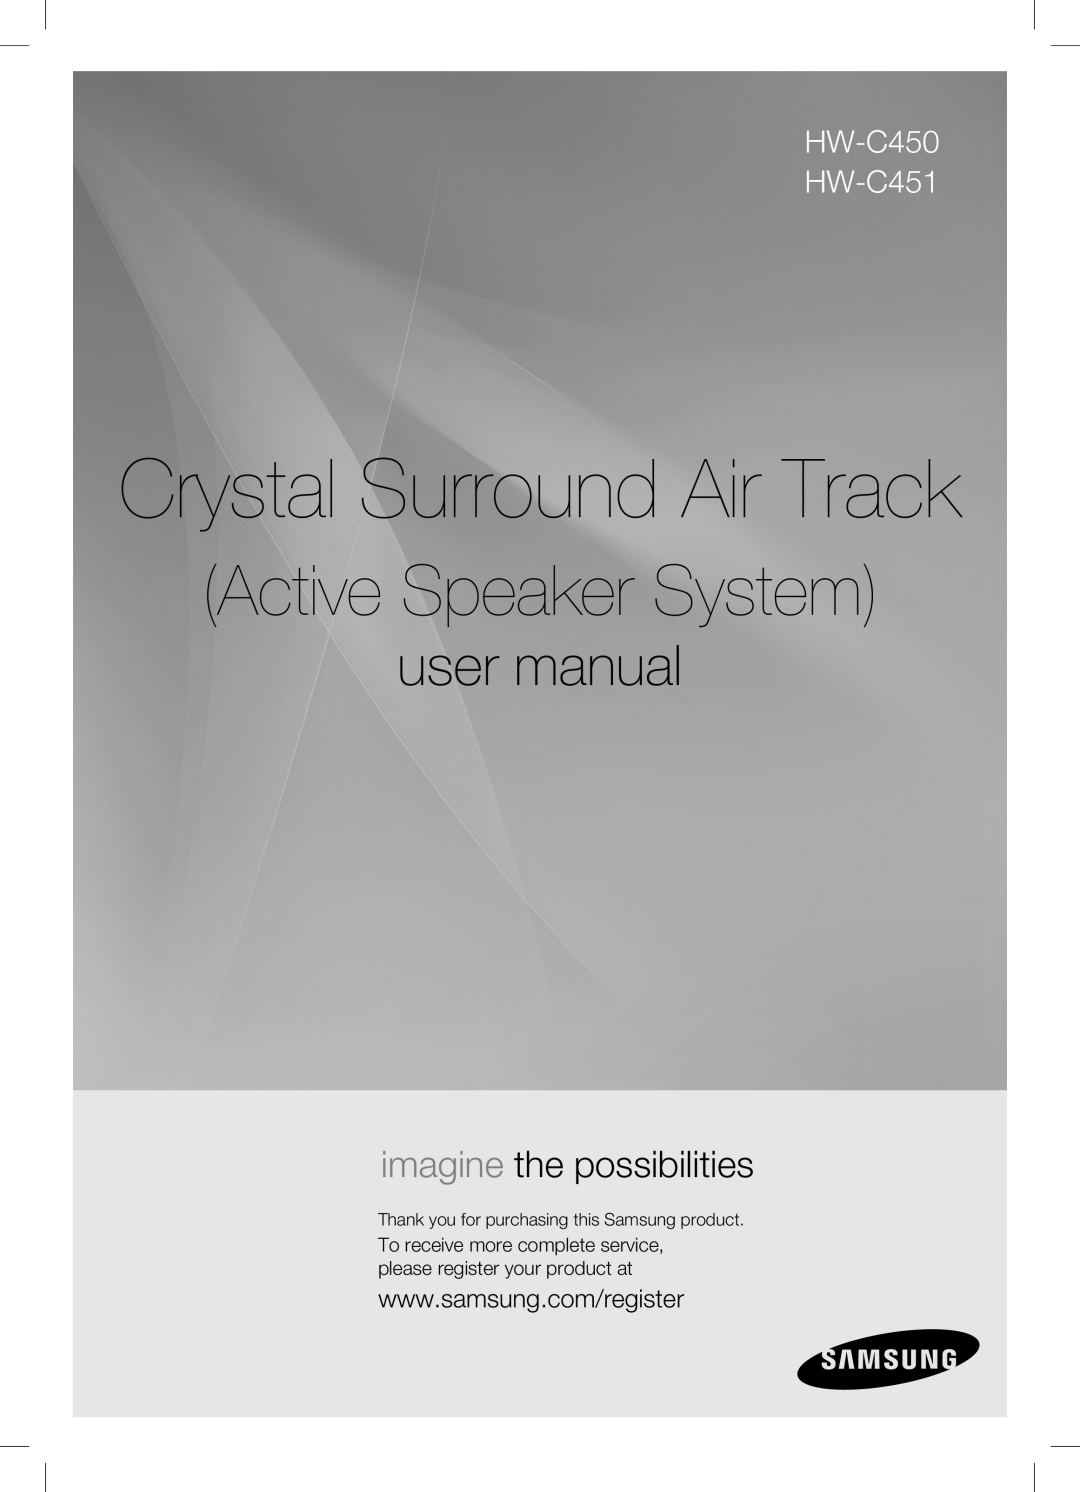 Samsung user manual Crystal Surround Air Track, Active Speaker System, imagine the possibilities, HW-C450 HW-C451 